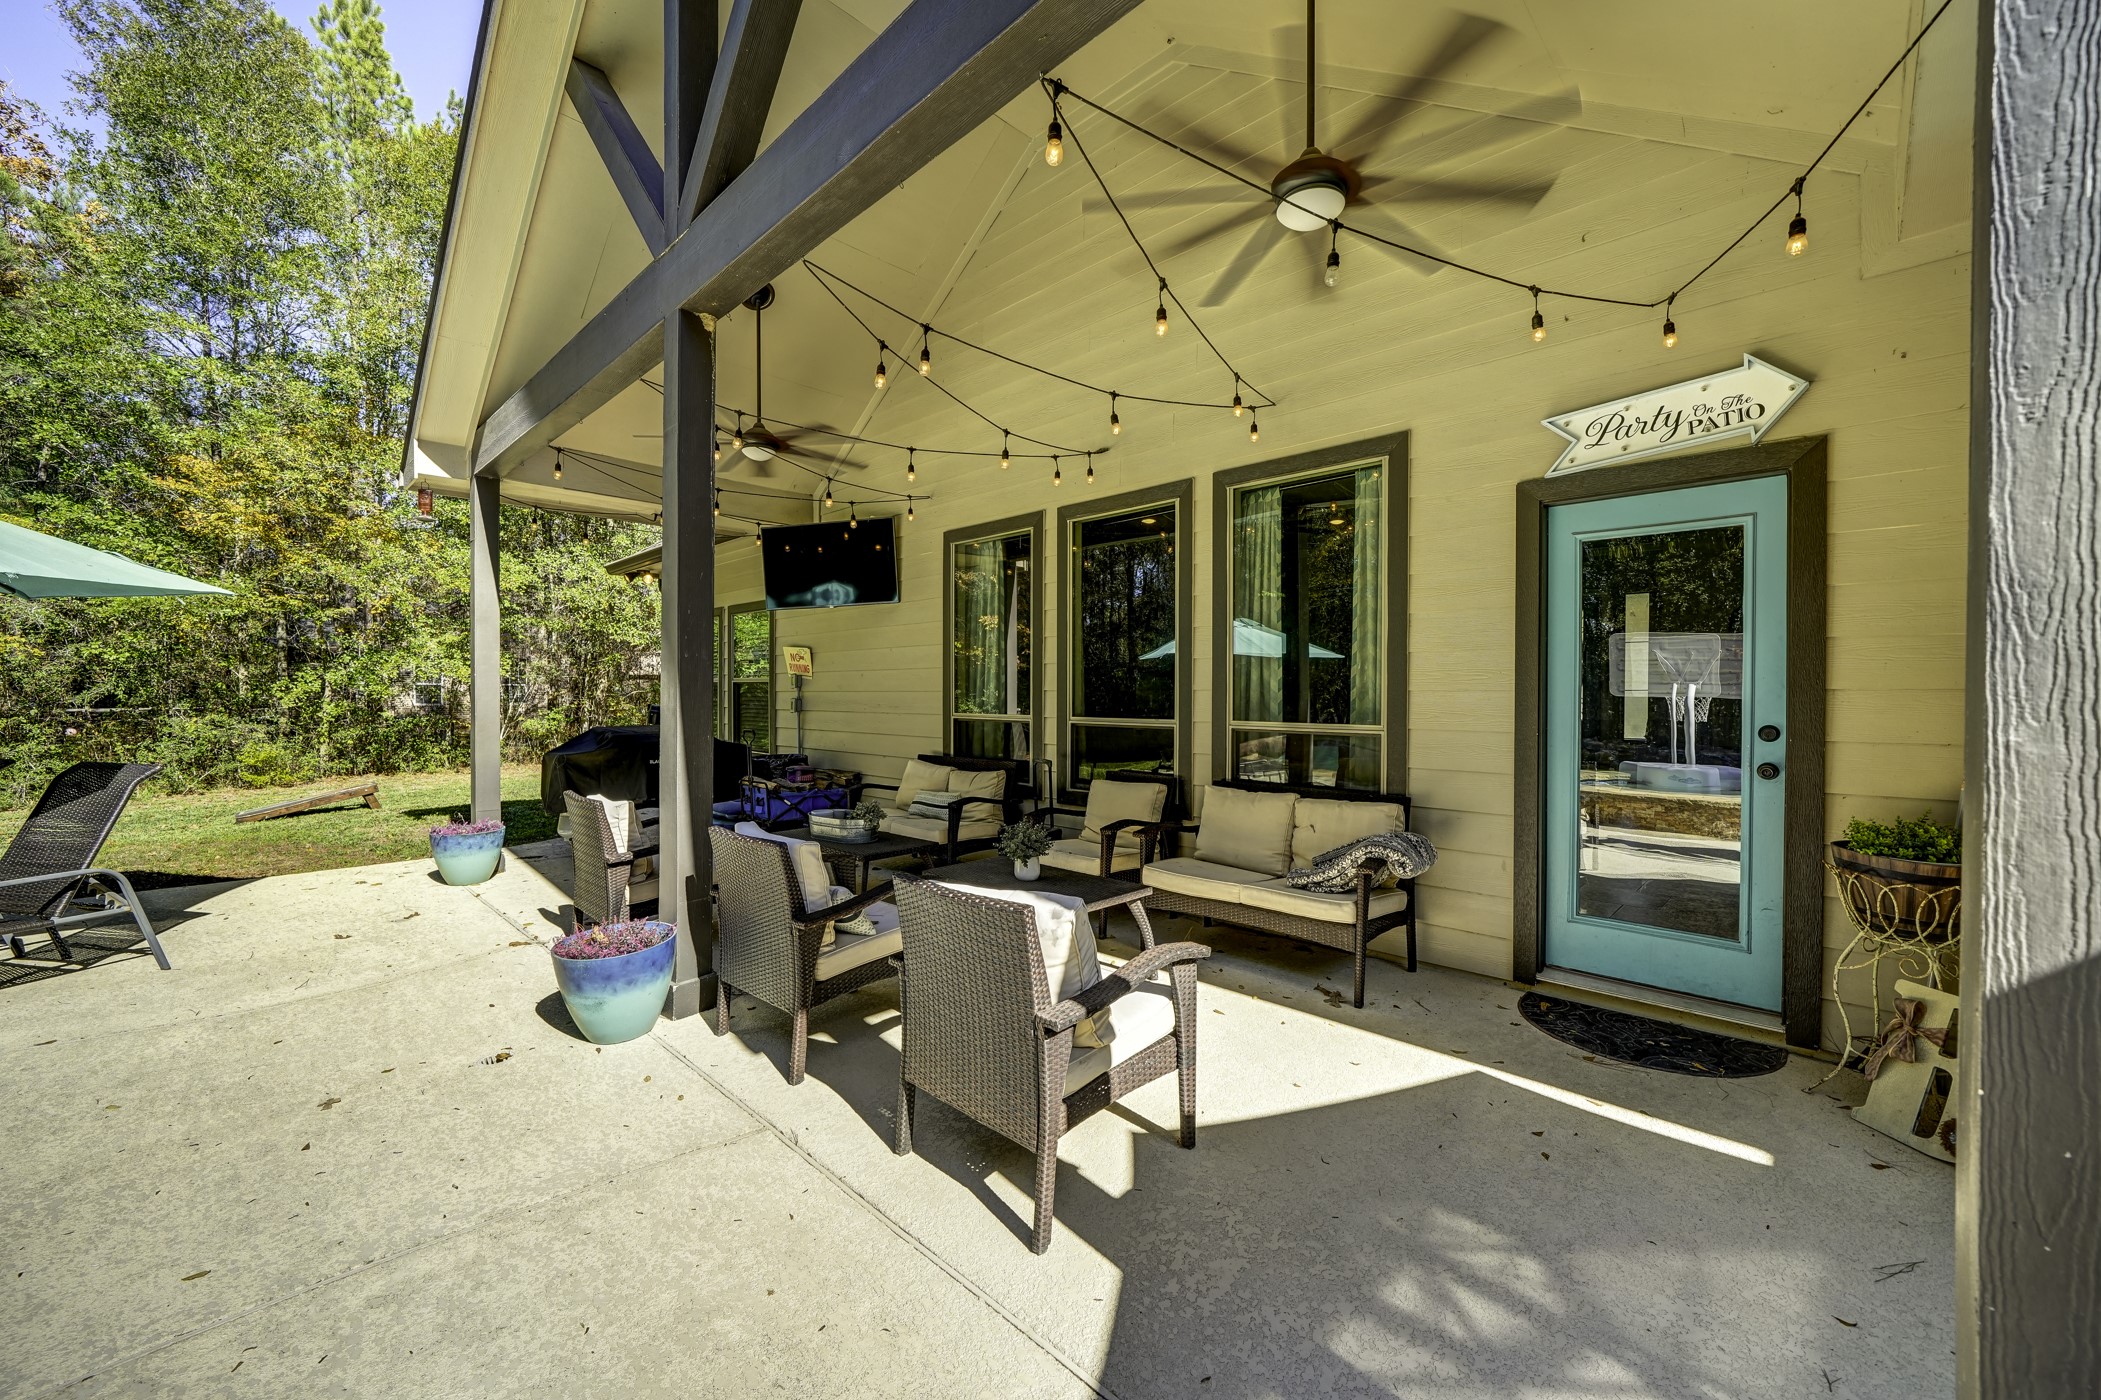 Head to the covered patio to enjoy the outdoors. A high roof with ceiling fans help to circulate the air on a warm day.